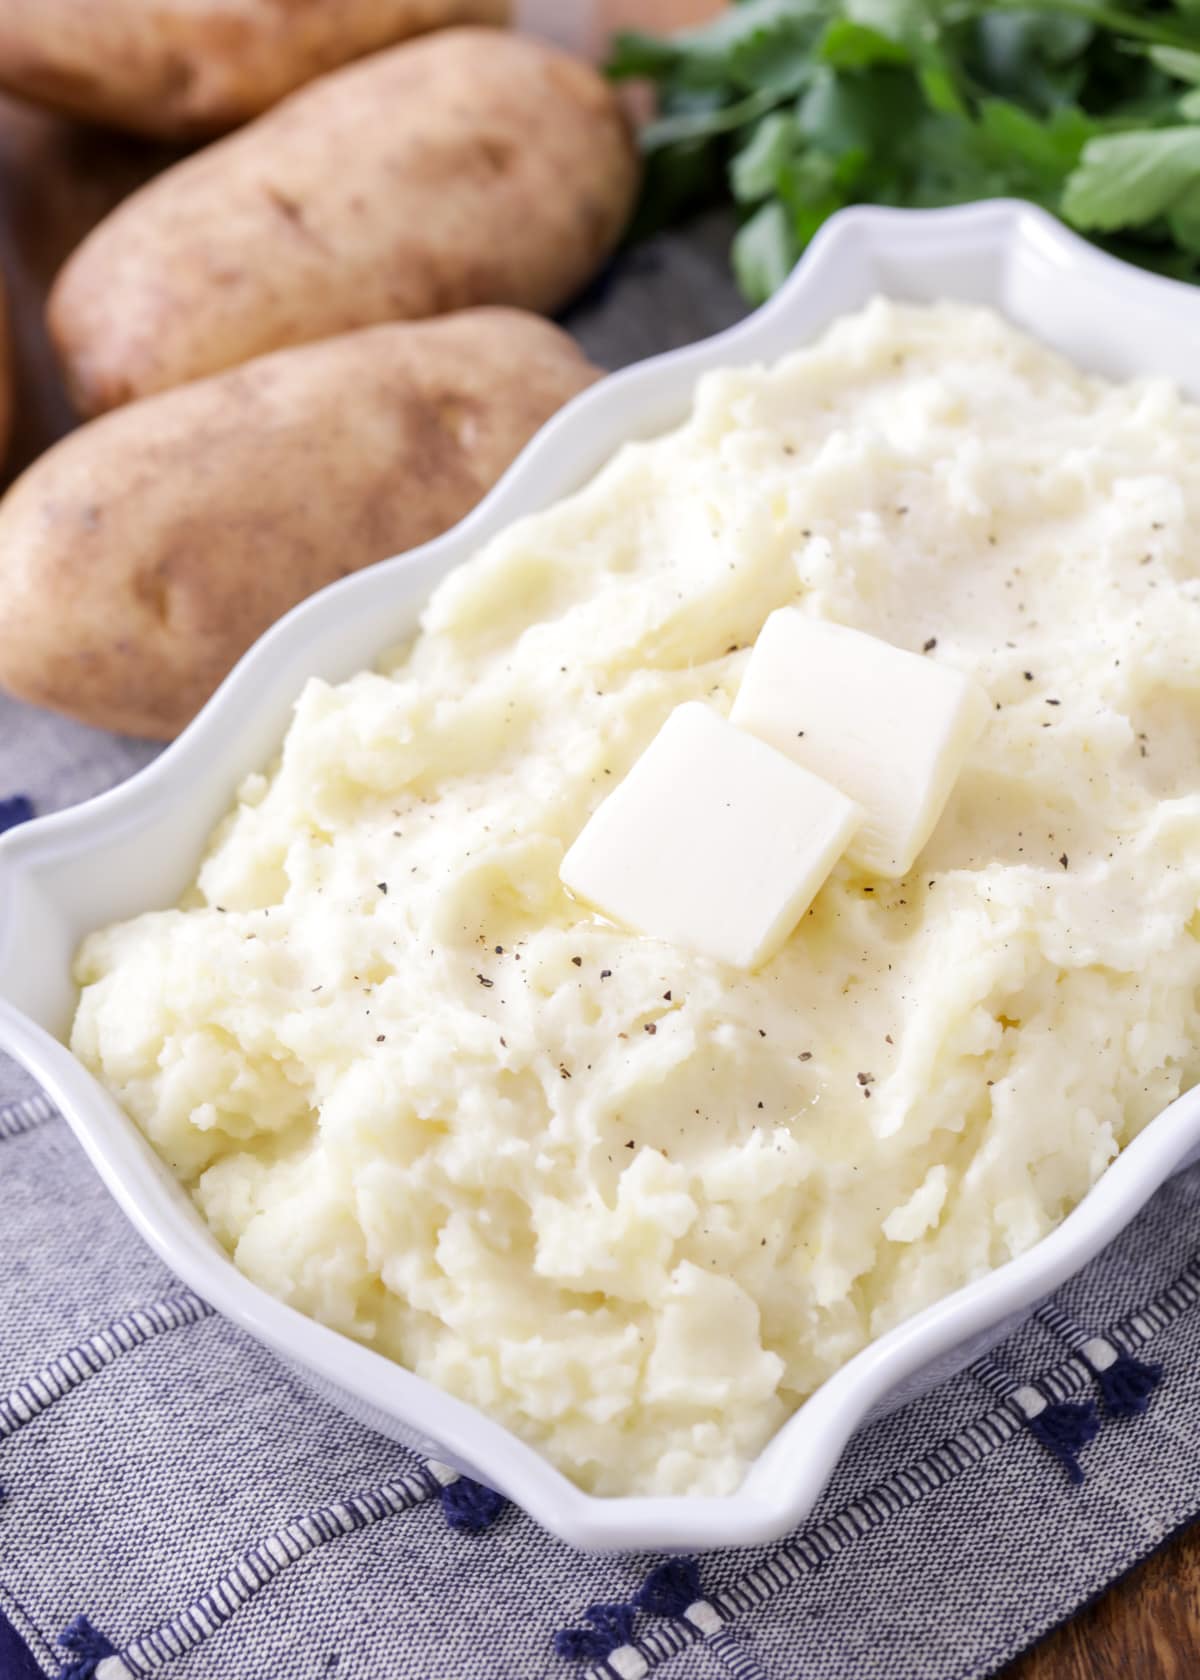 Best mashed potatoes recipe in white dish close up image.